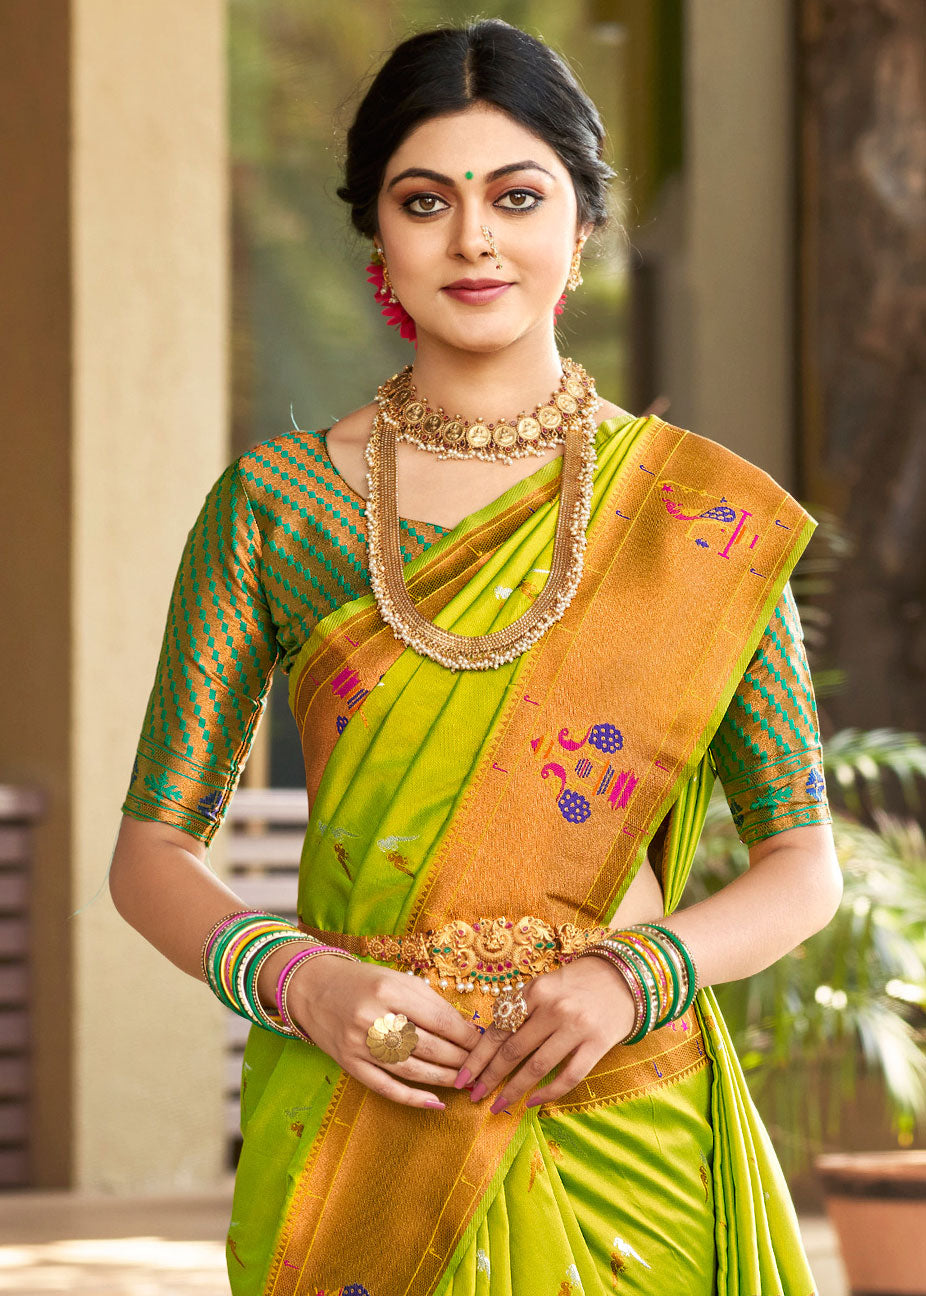 The Yellow with green contrast boarder in maharani paithani silk saree.